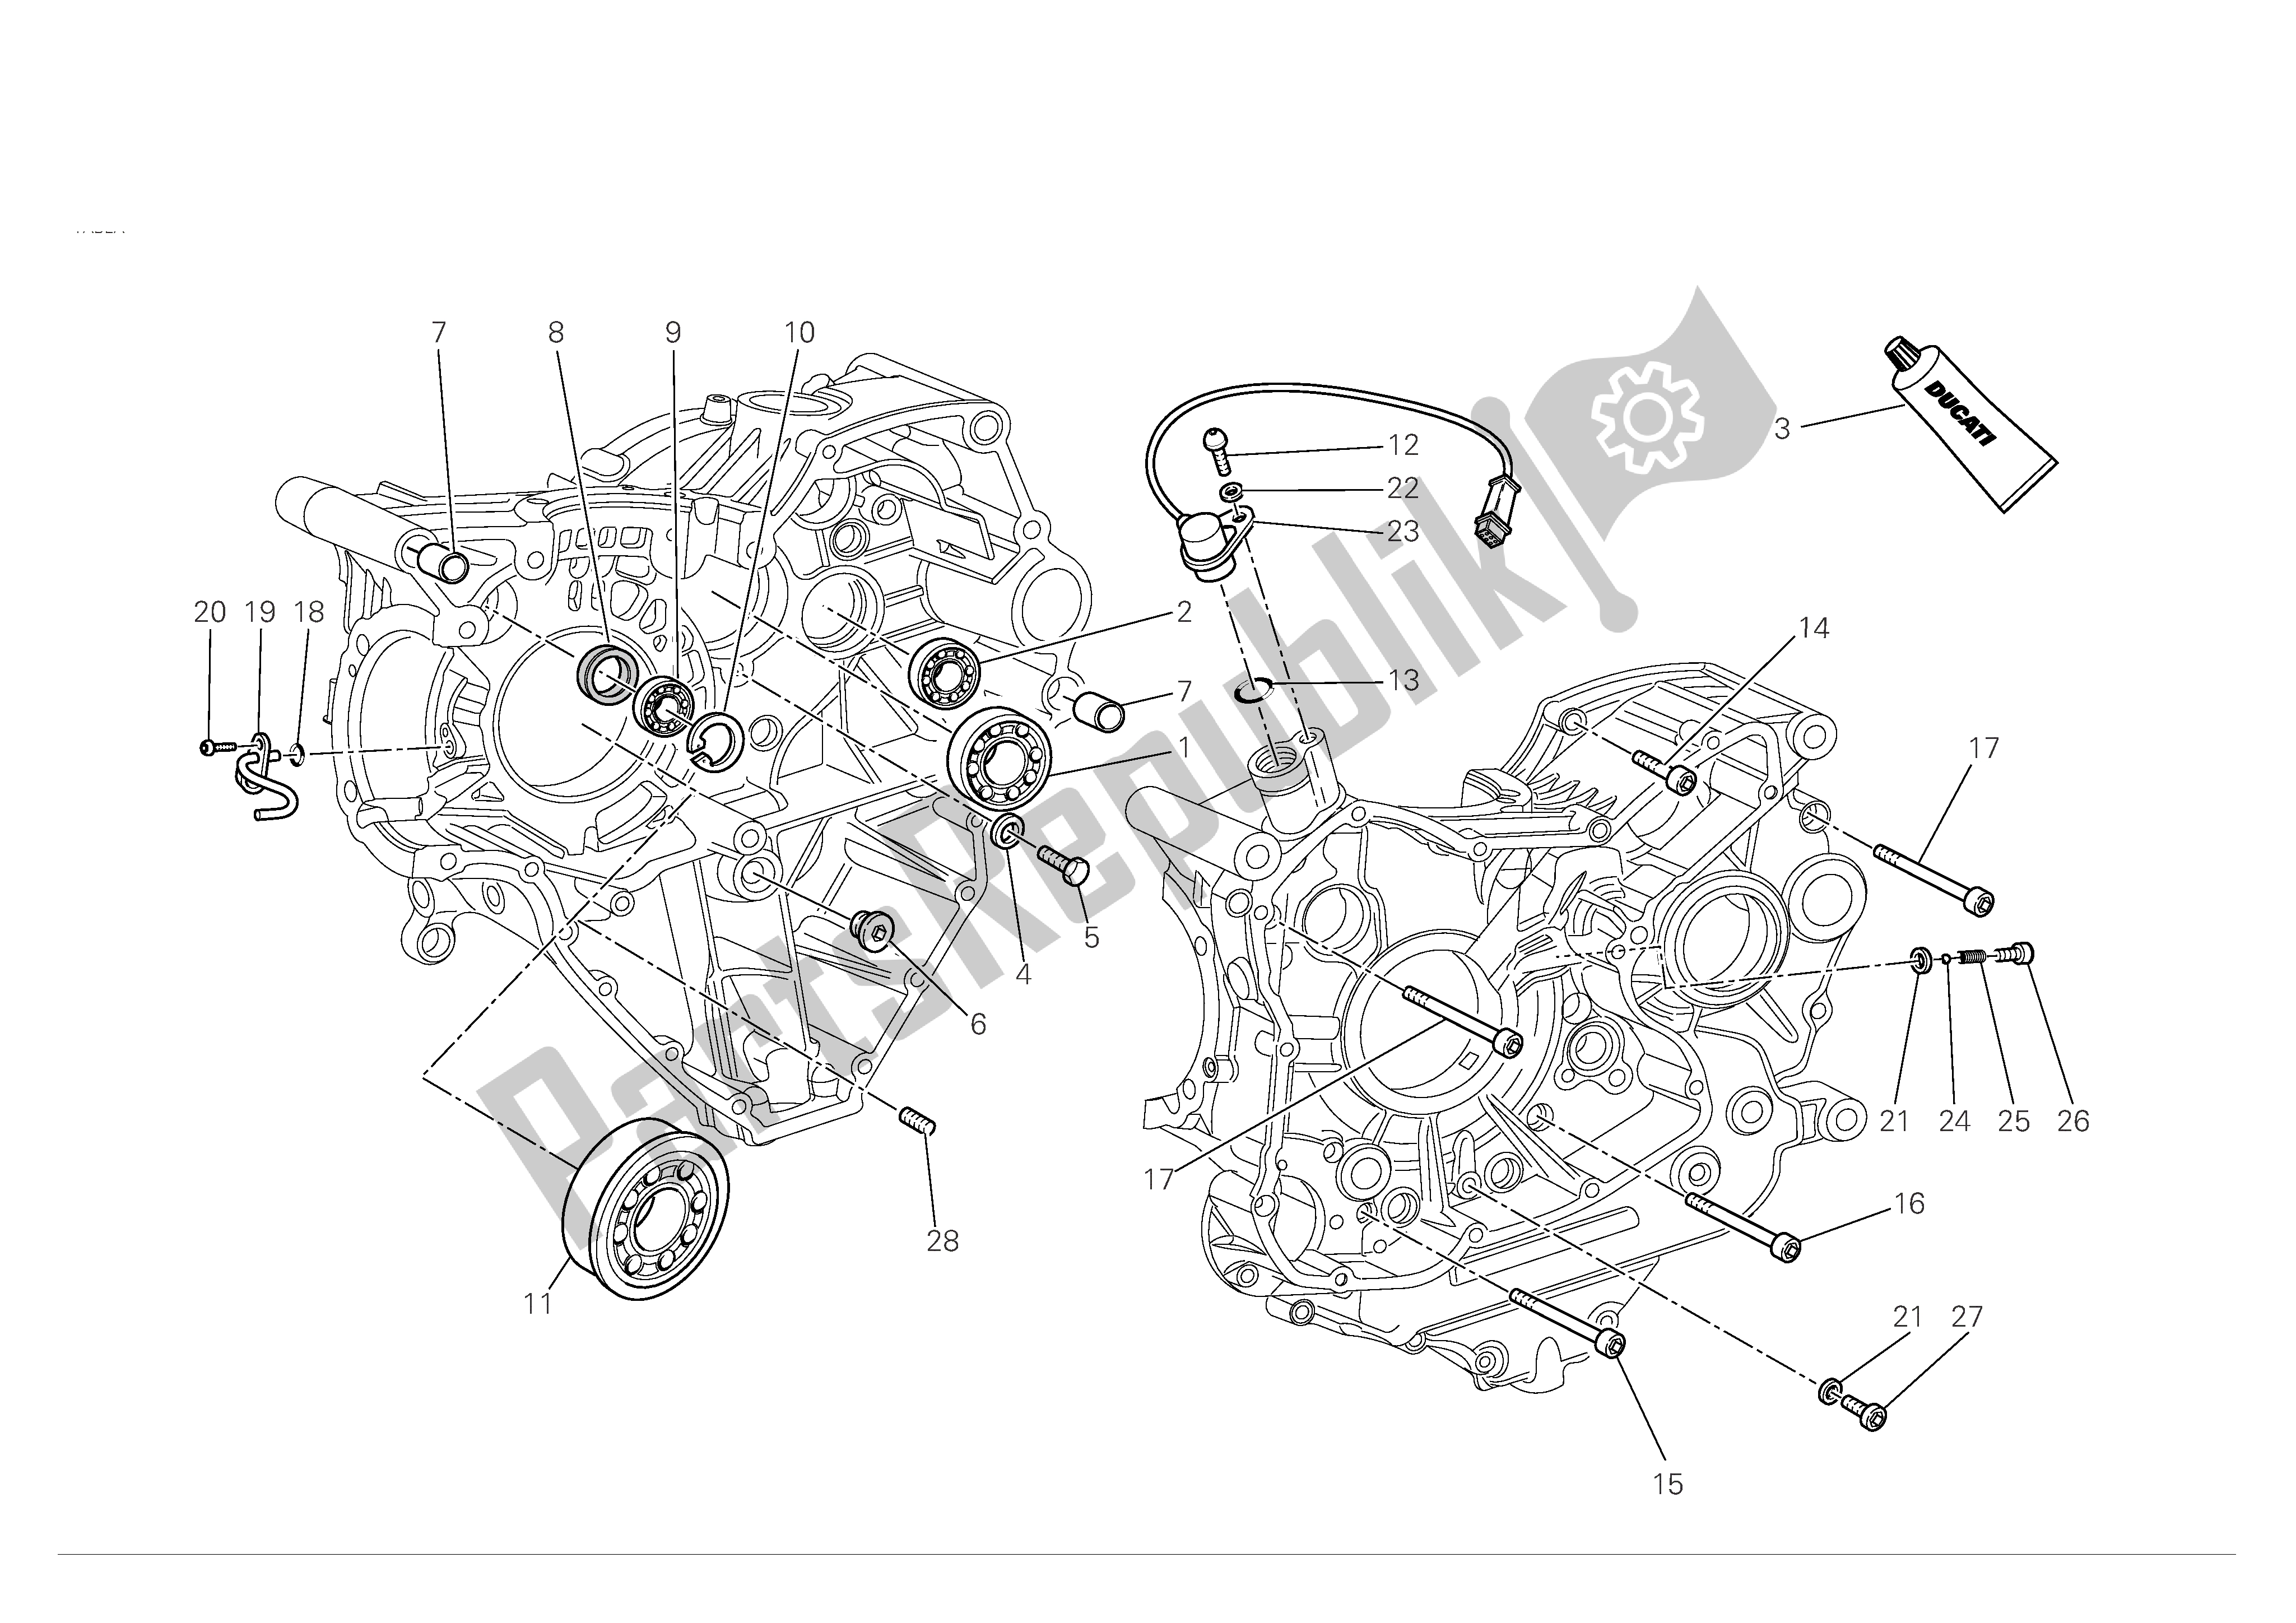 All parts for the Crankcase Halves of the Ducati 848 2008